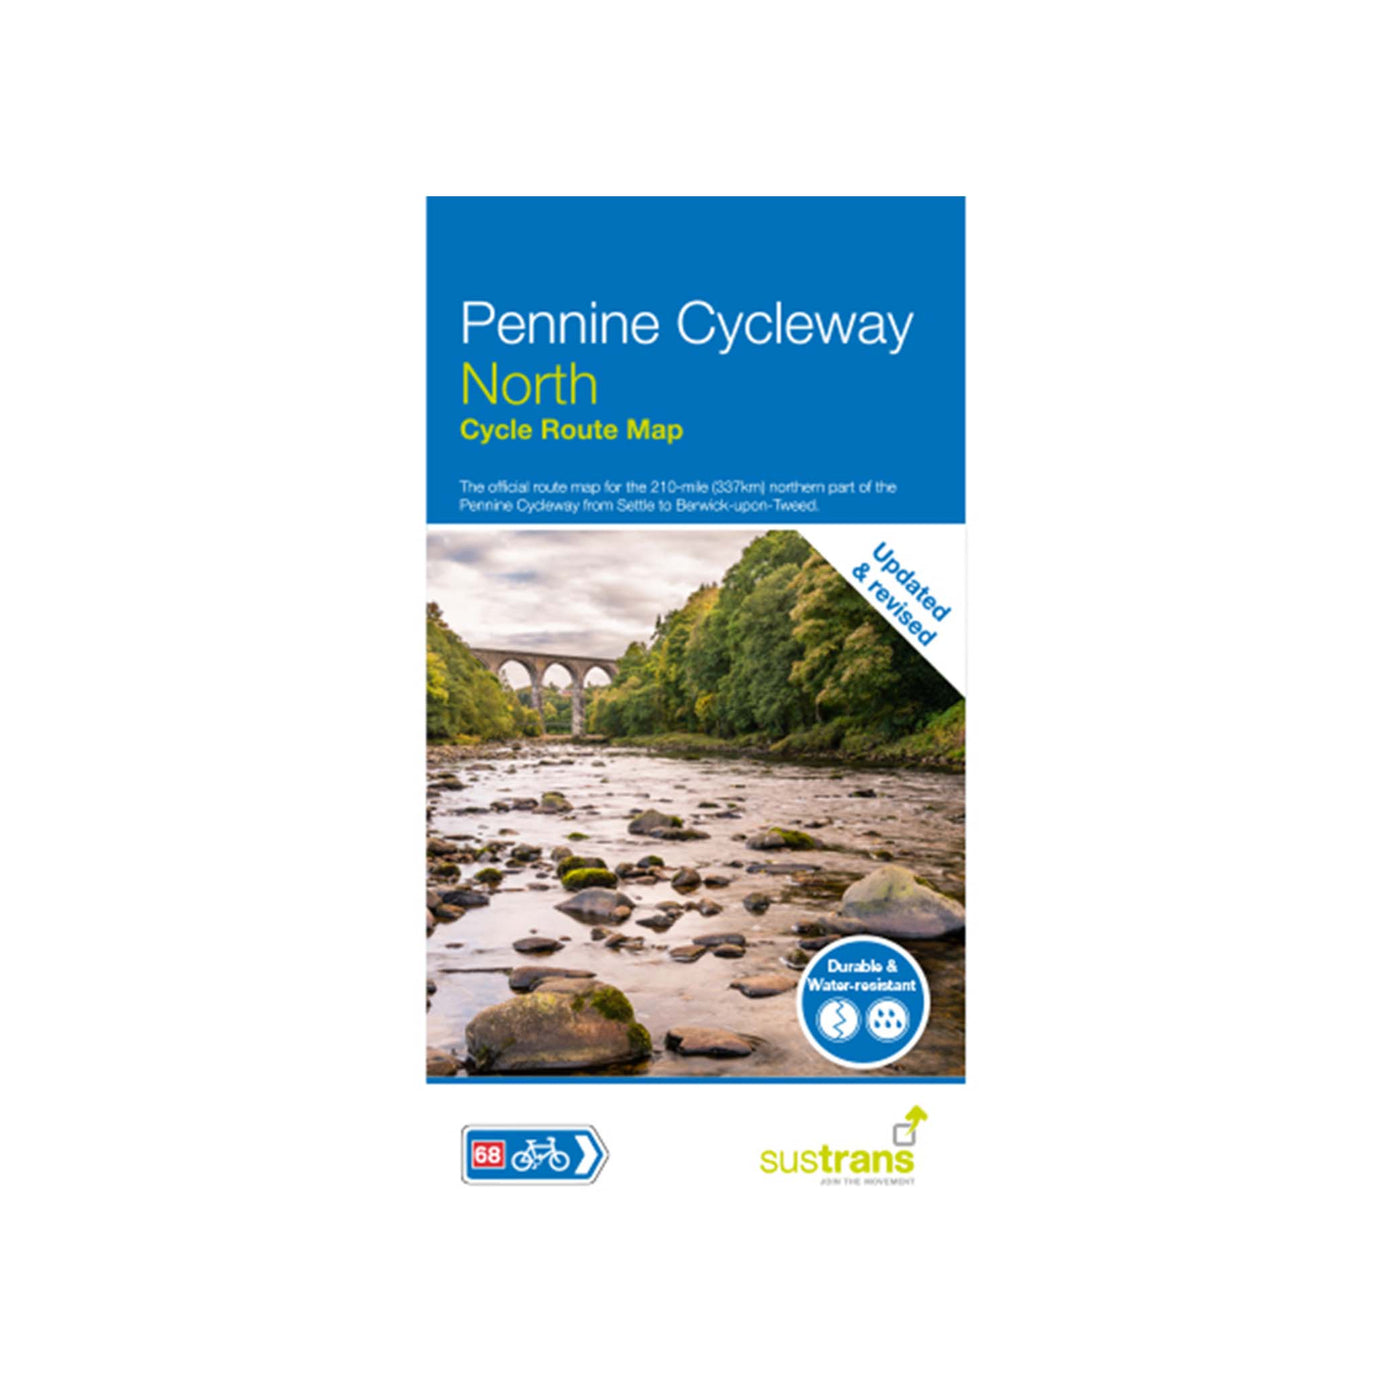 Pennine Cycleway North cycle route map. Updated and revised 2021